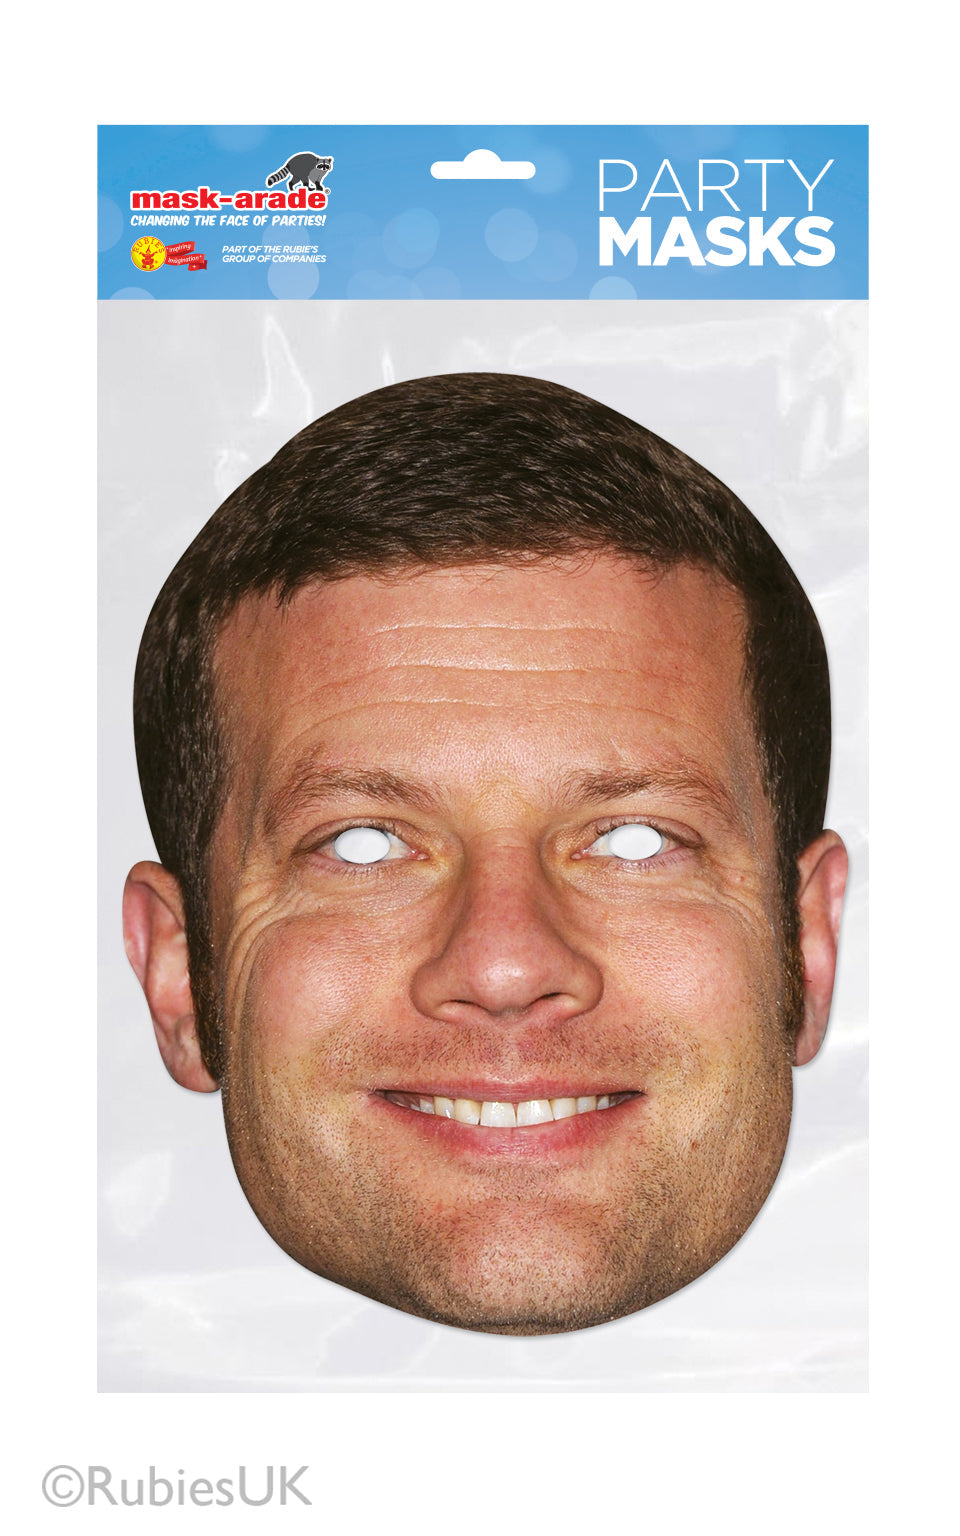 Dermot O Leary Celebrity Face Mask. Life size card face mask comes with eye holes and elastic fastening.